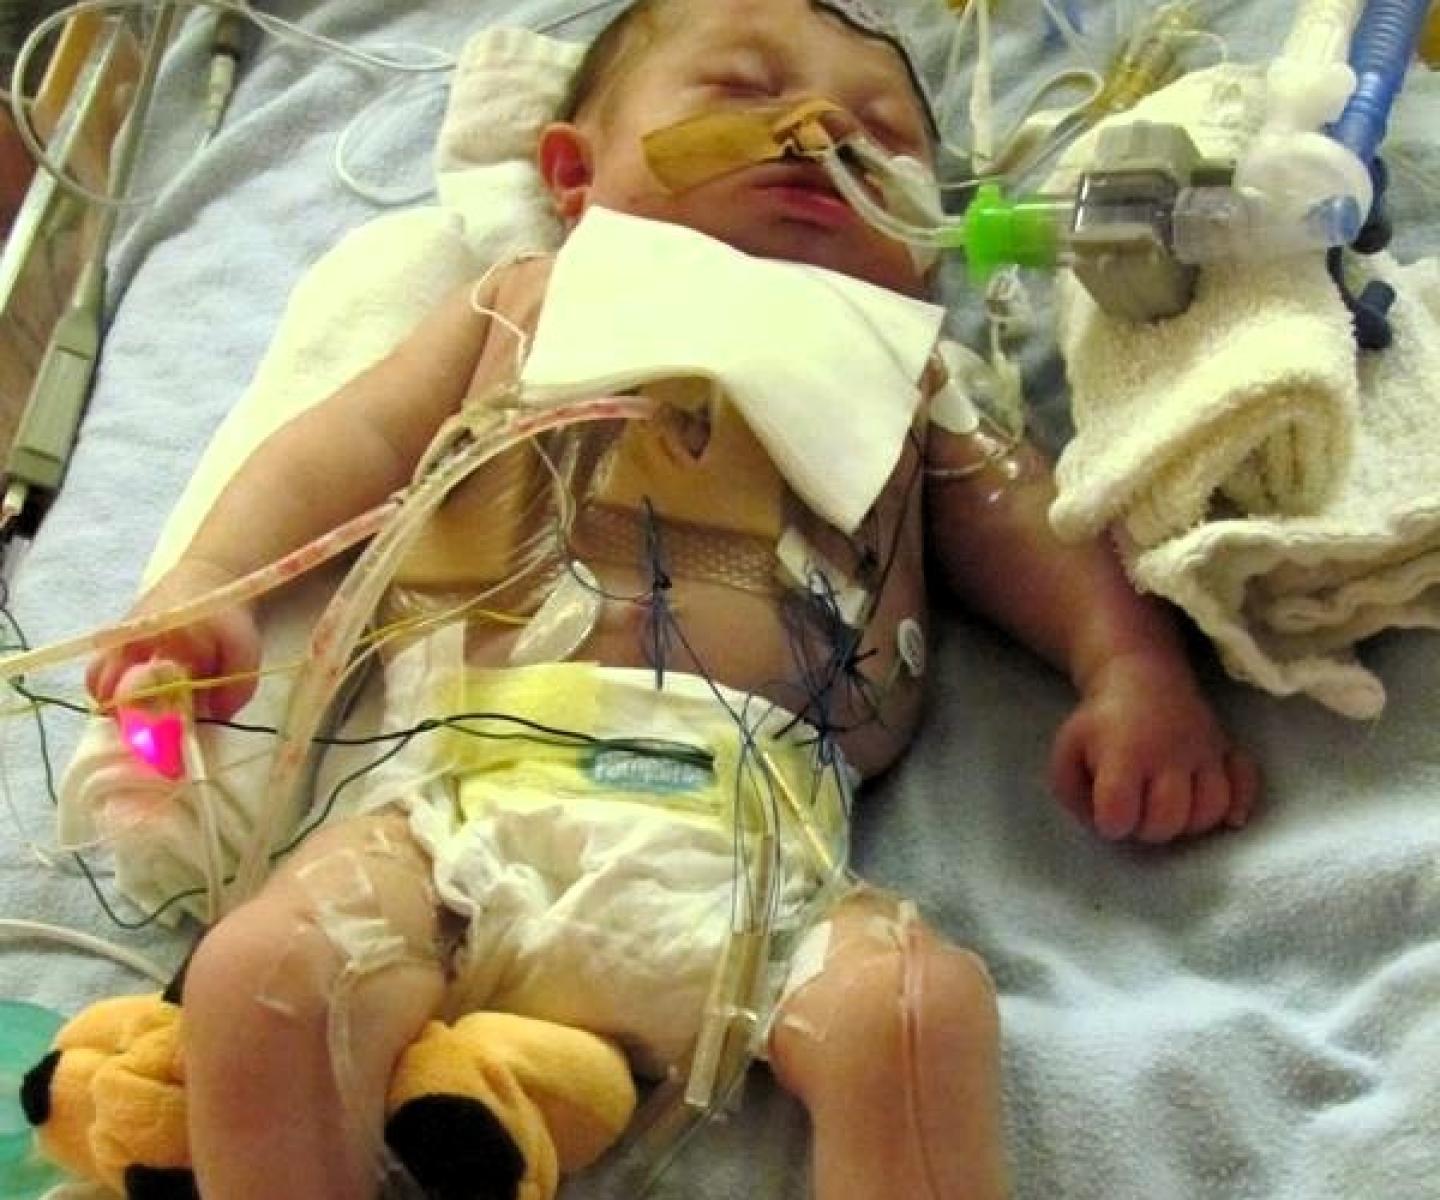 Infant in diaper on hospital bed connected to tubes